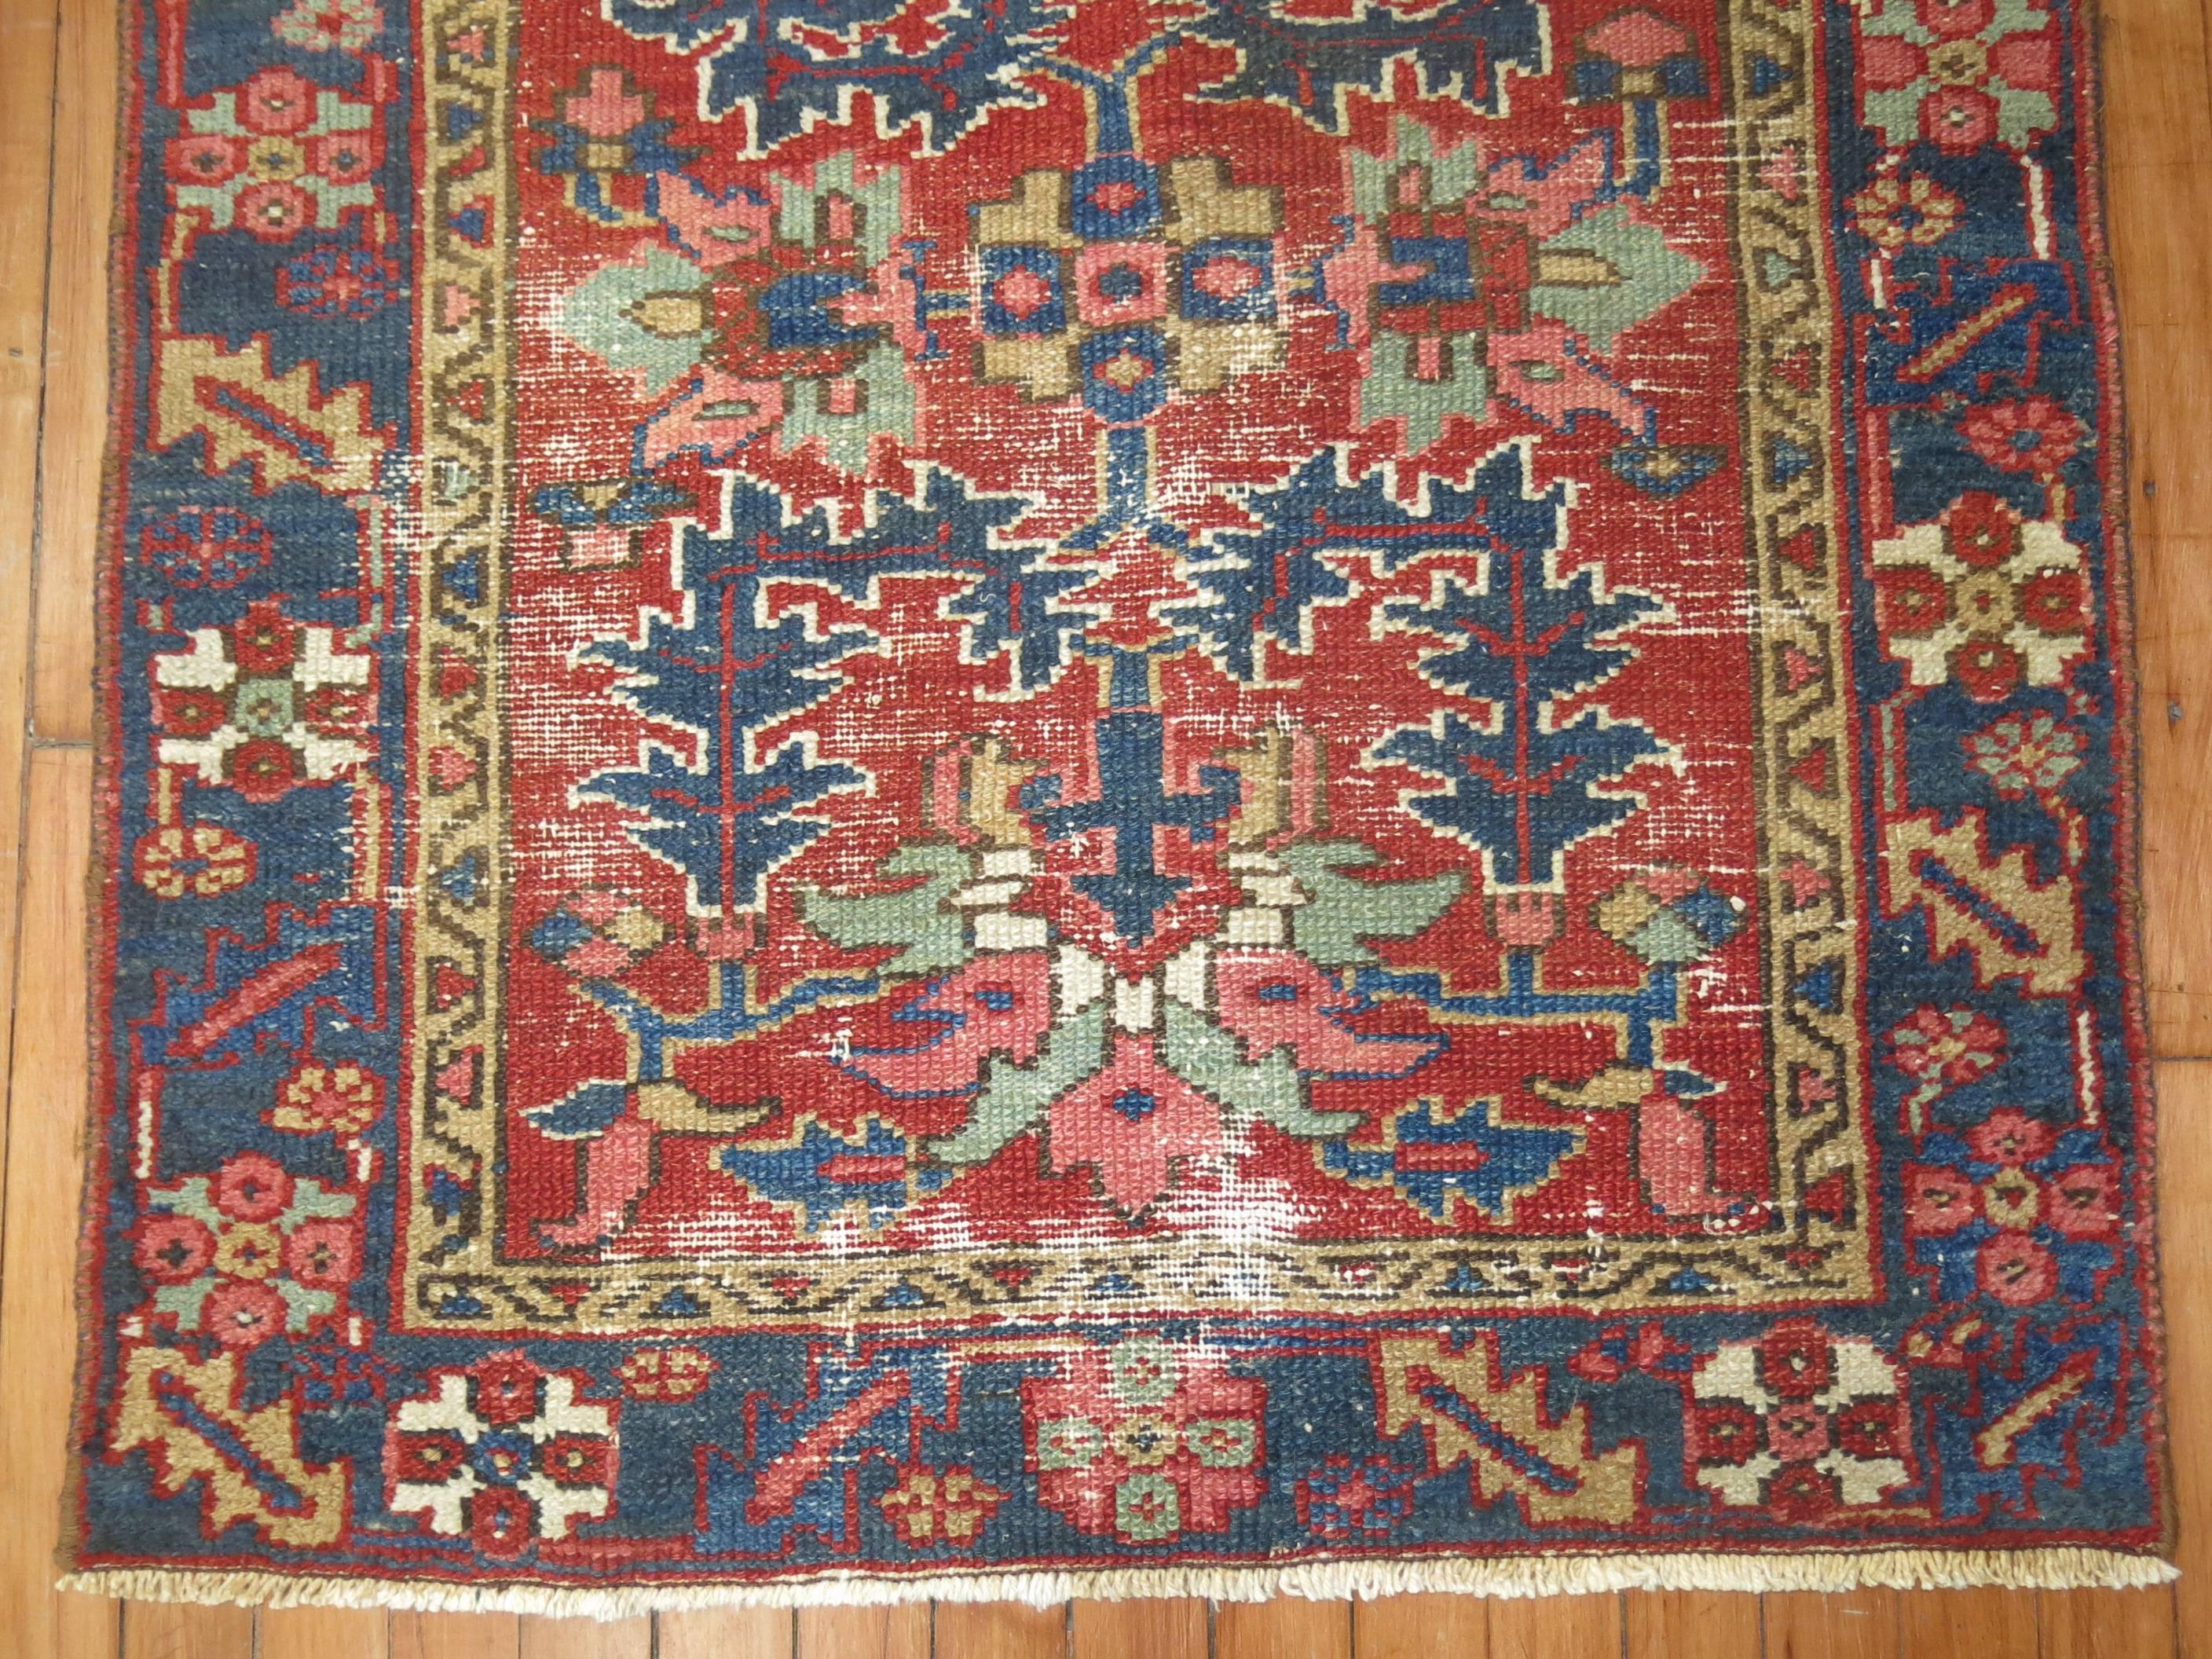 Square size Persian Heriz throw rug in vivid reds, greens and blues.